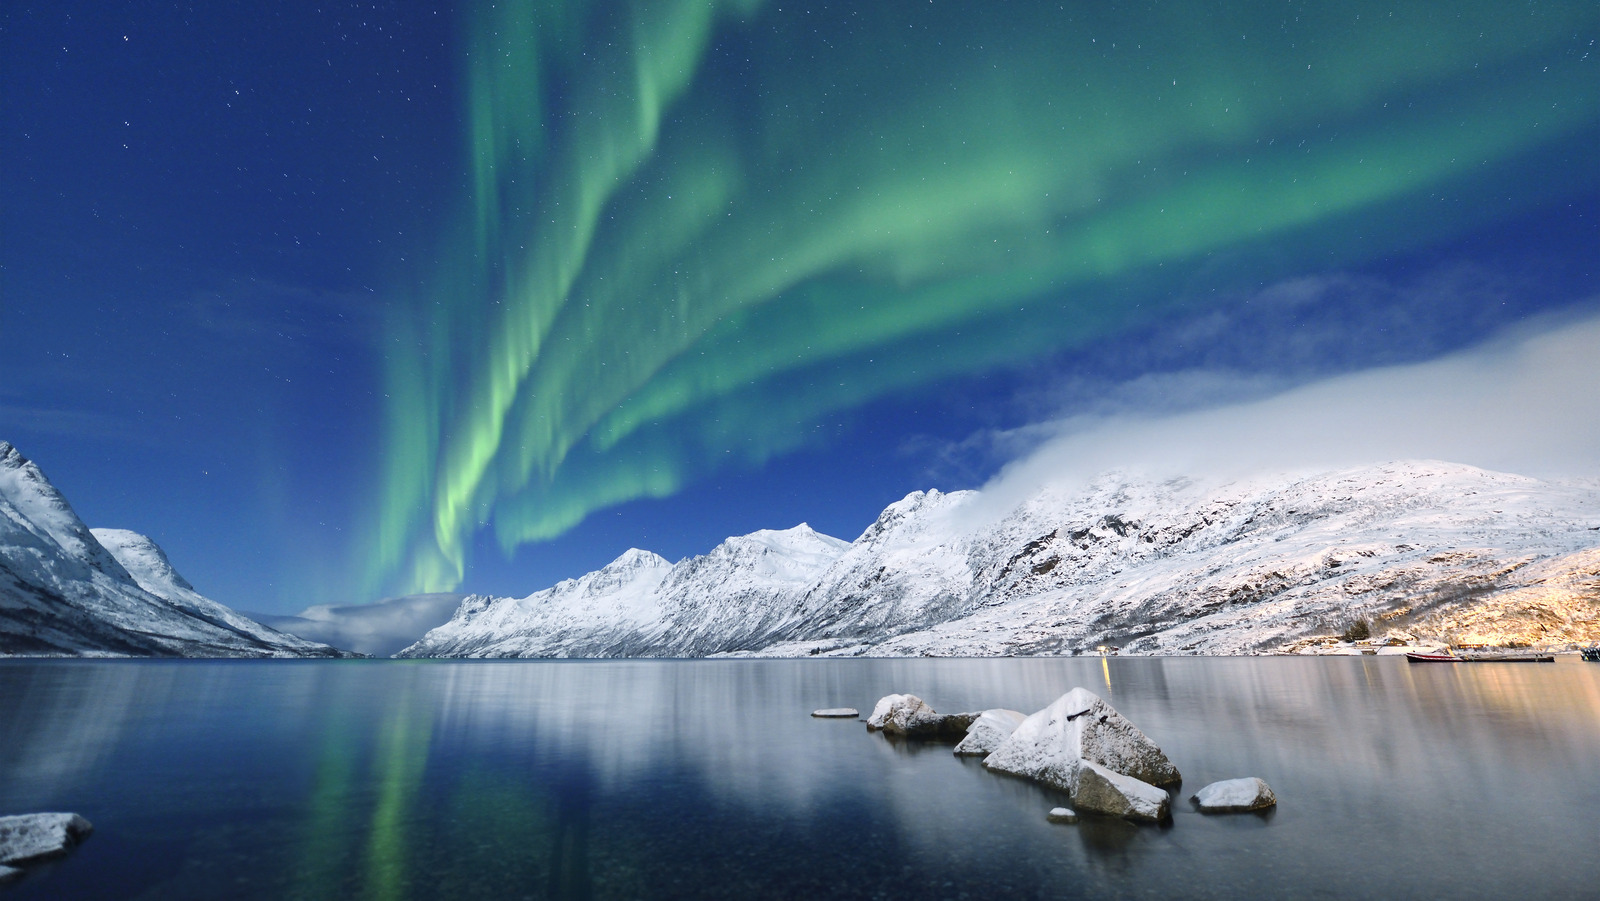 View The Northern Lights This Year On This Unforgettable